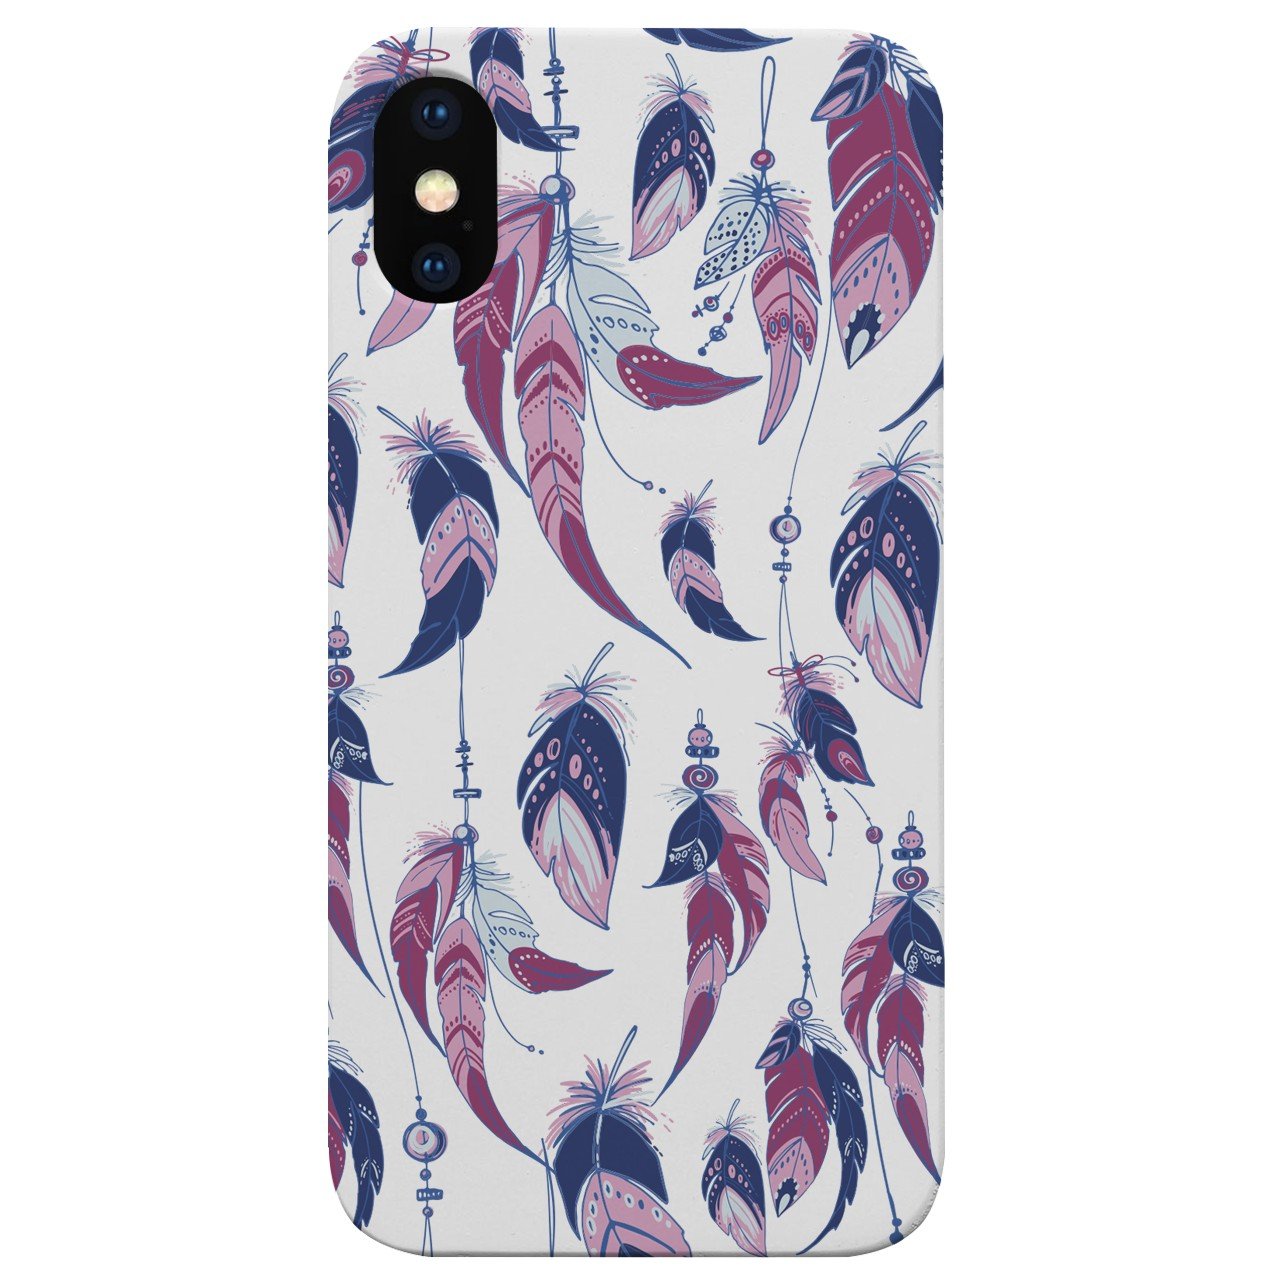 Feathers - Engraved - Wooden Phone Case